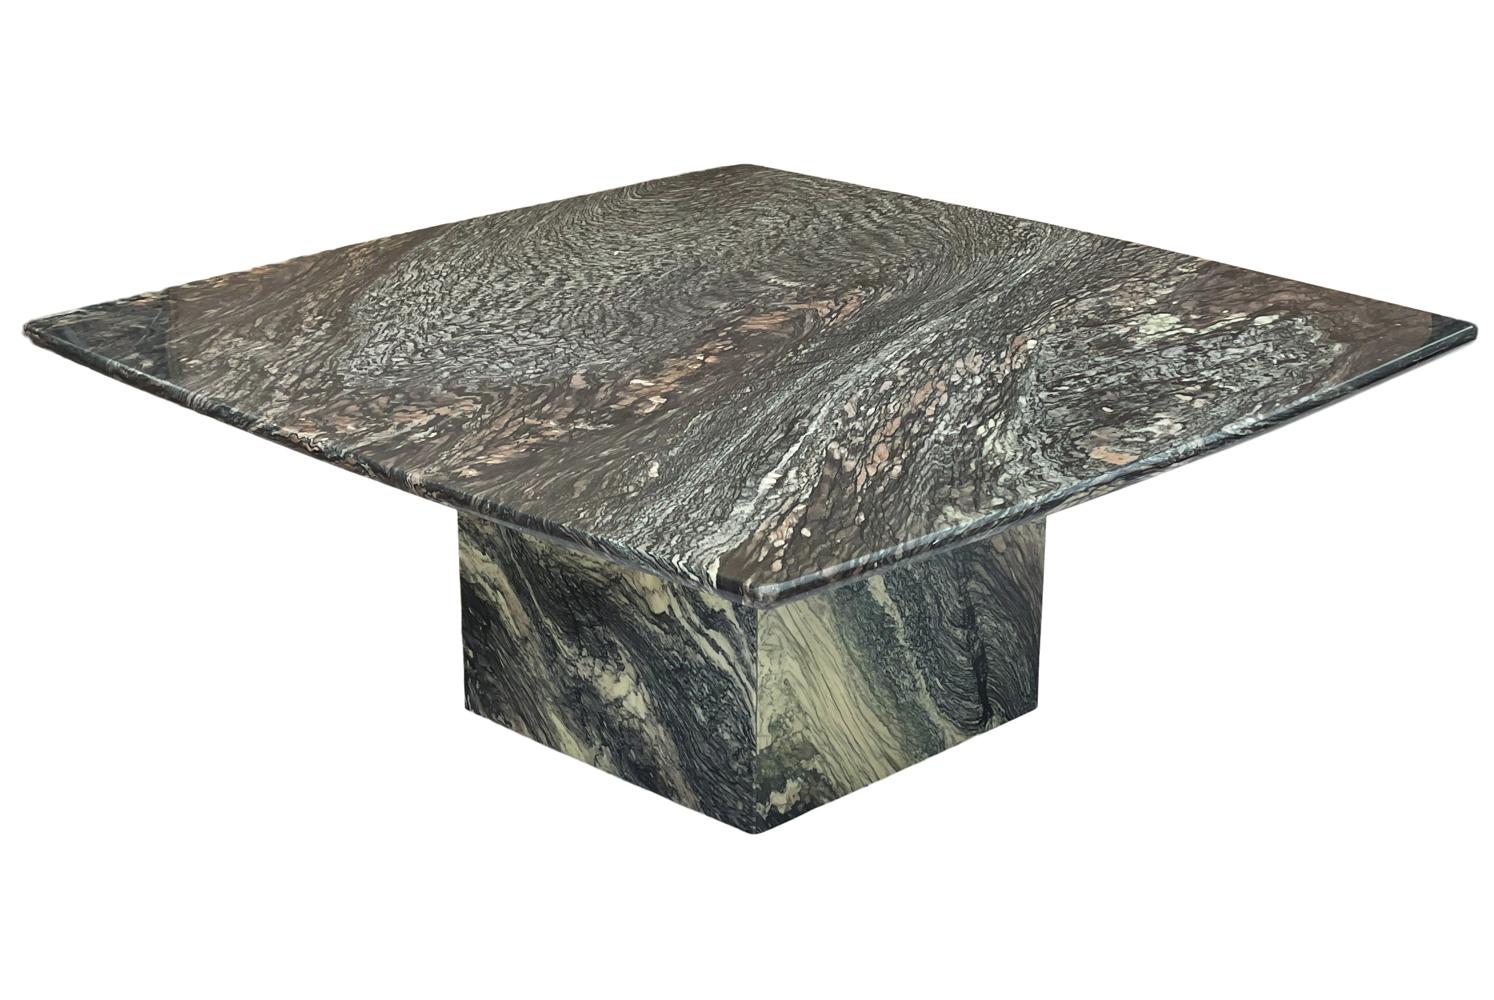 A stunning marble coffee table from Italy circa 1990's. It consists of all marble slab construction with beautiful veining.